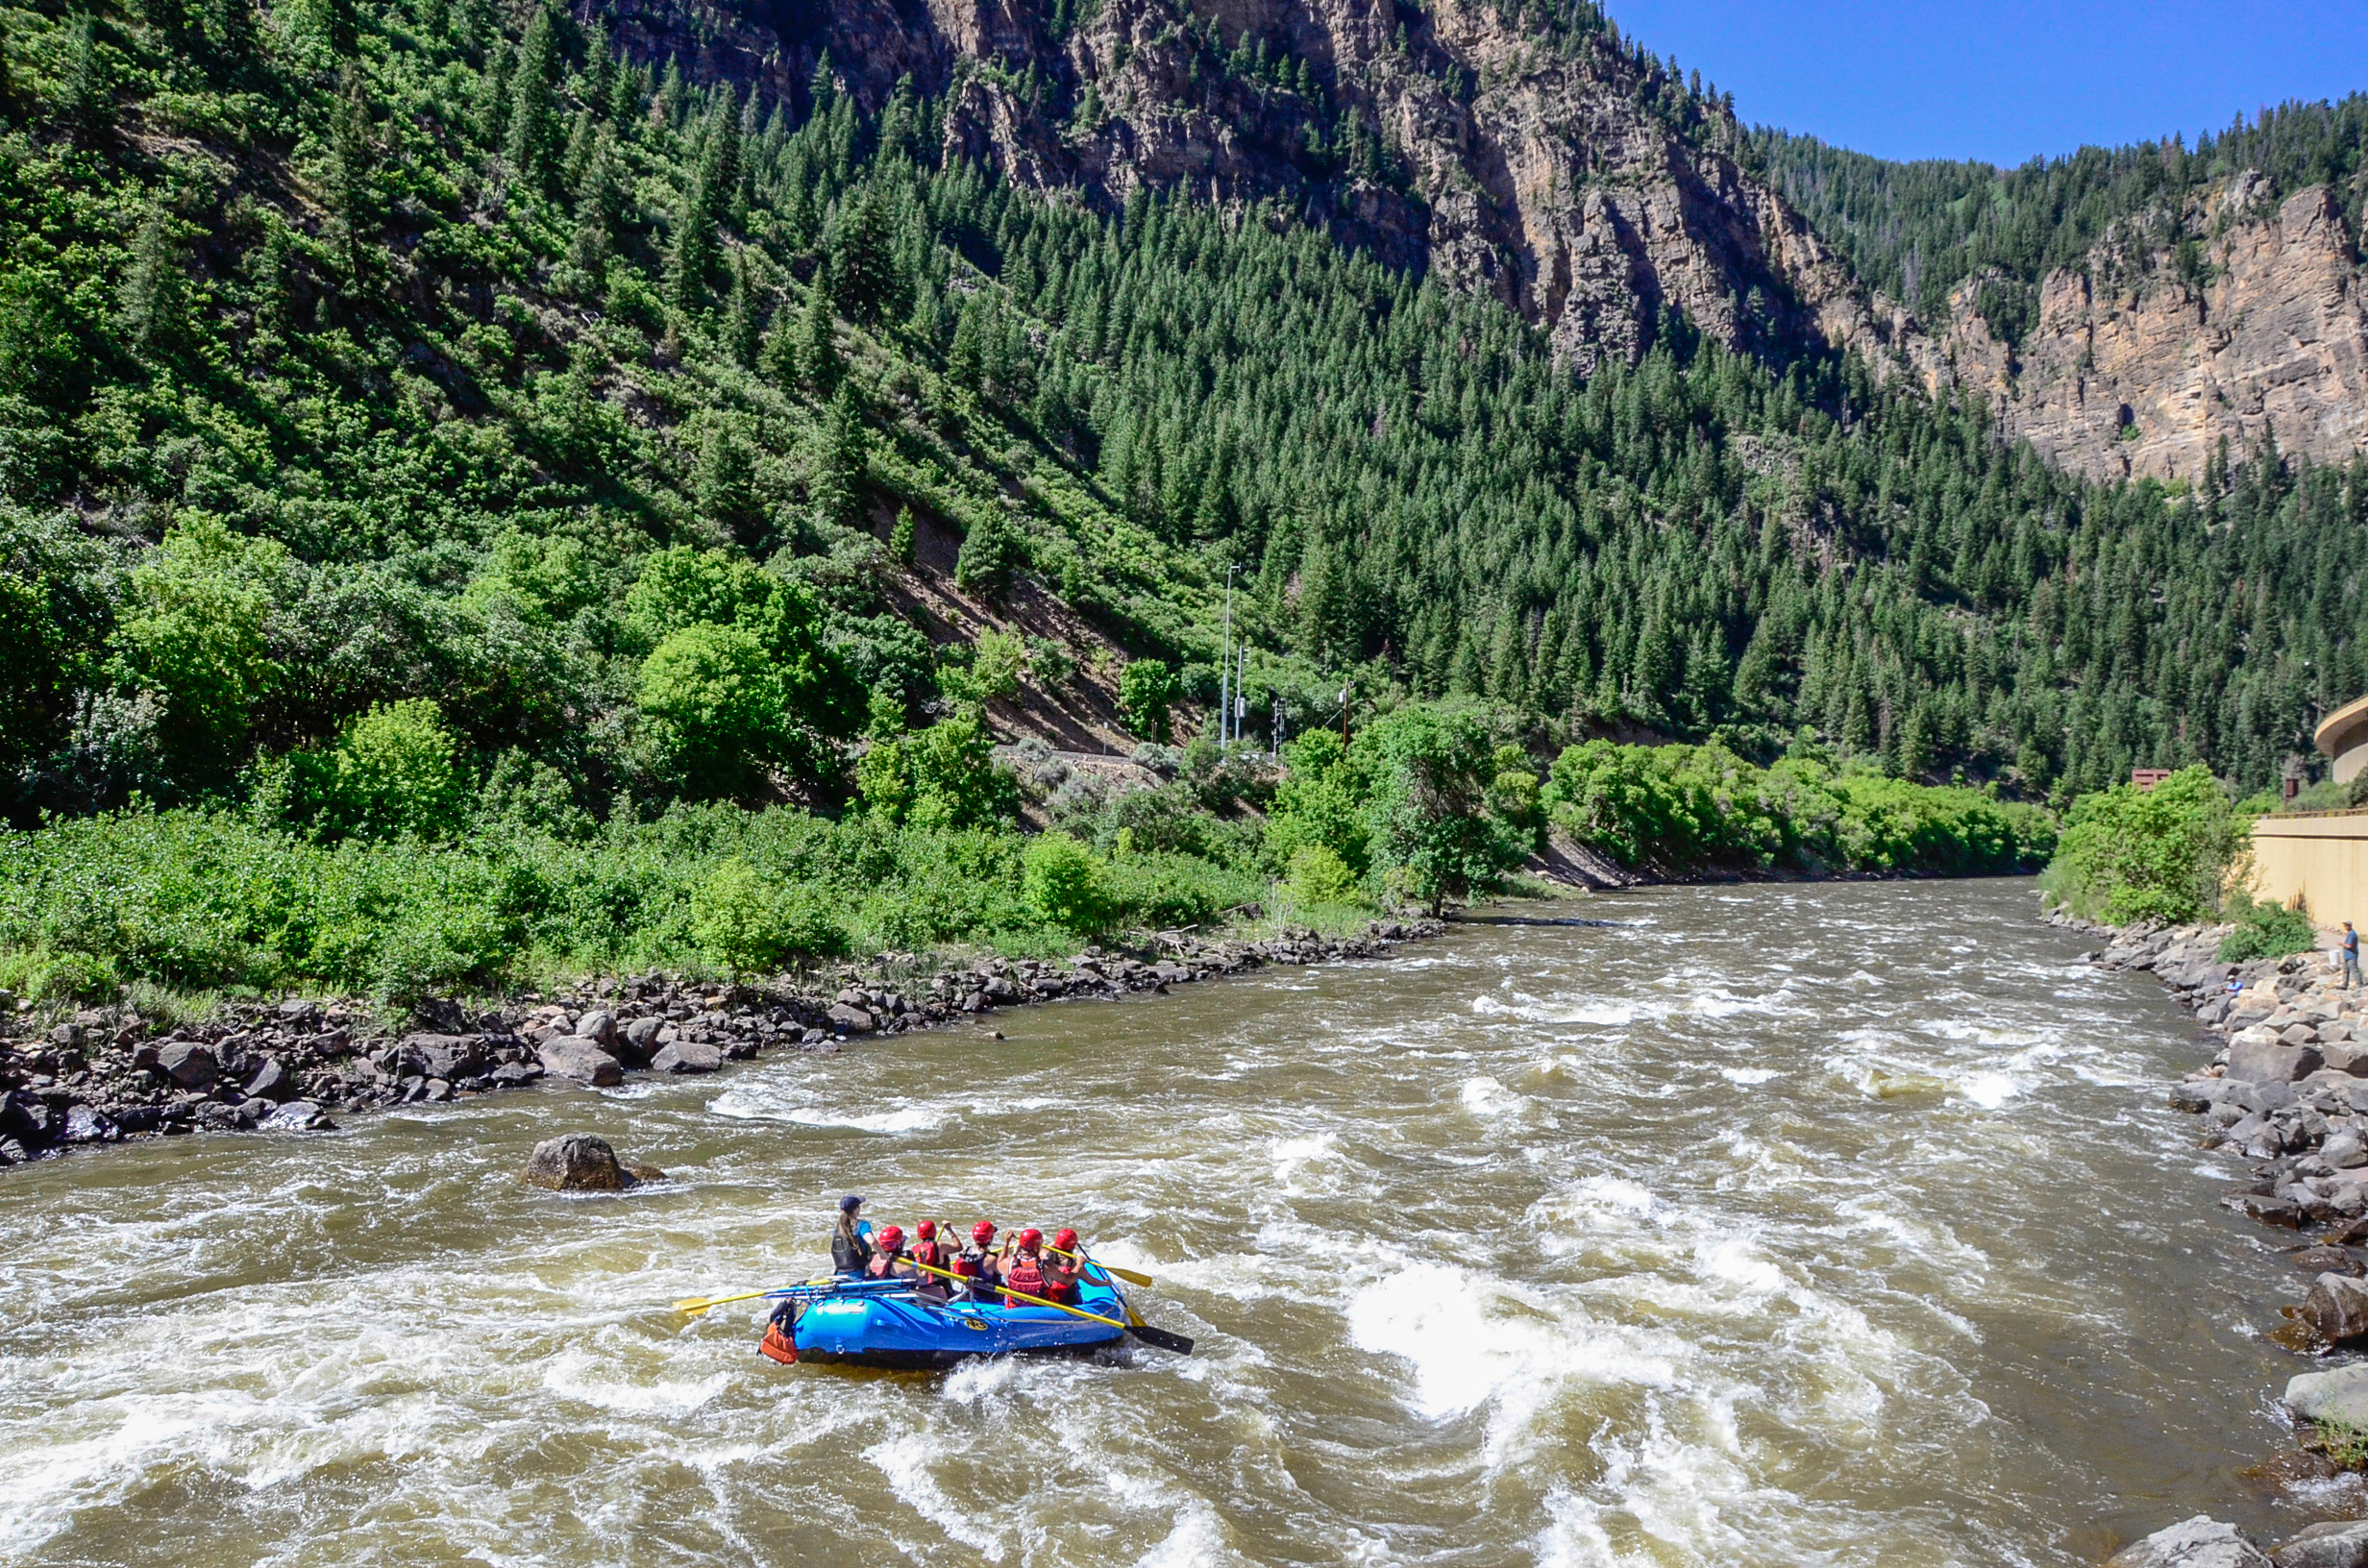 A stunning photo of a full boat gracefully floating down the Colorado River in Glenwood Springs, CO. The canyon is adorned with vibrant green trees and rugged rocks, complemented by the backdrop of a clear, bluebird sky.